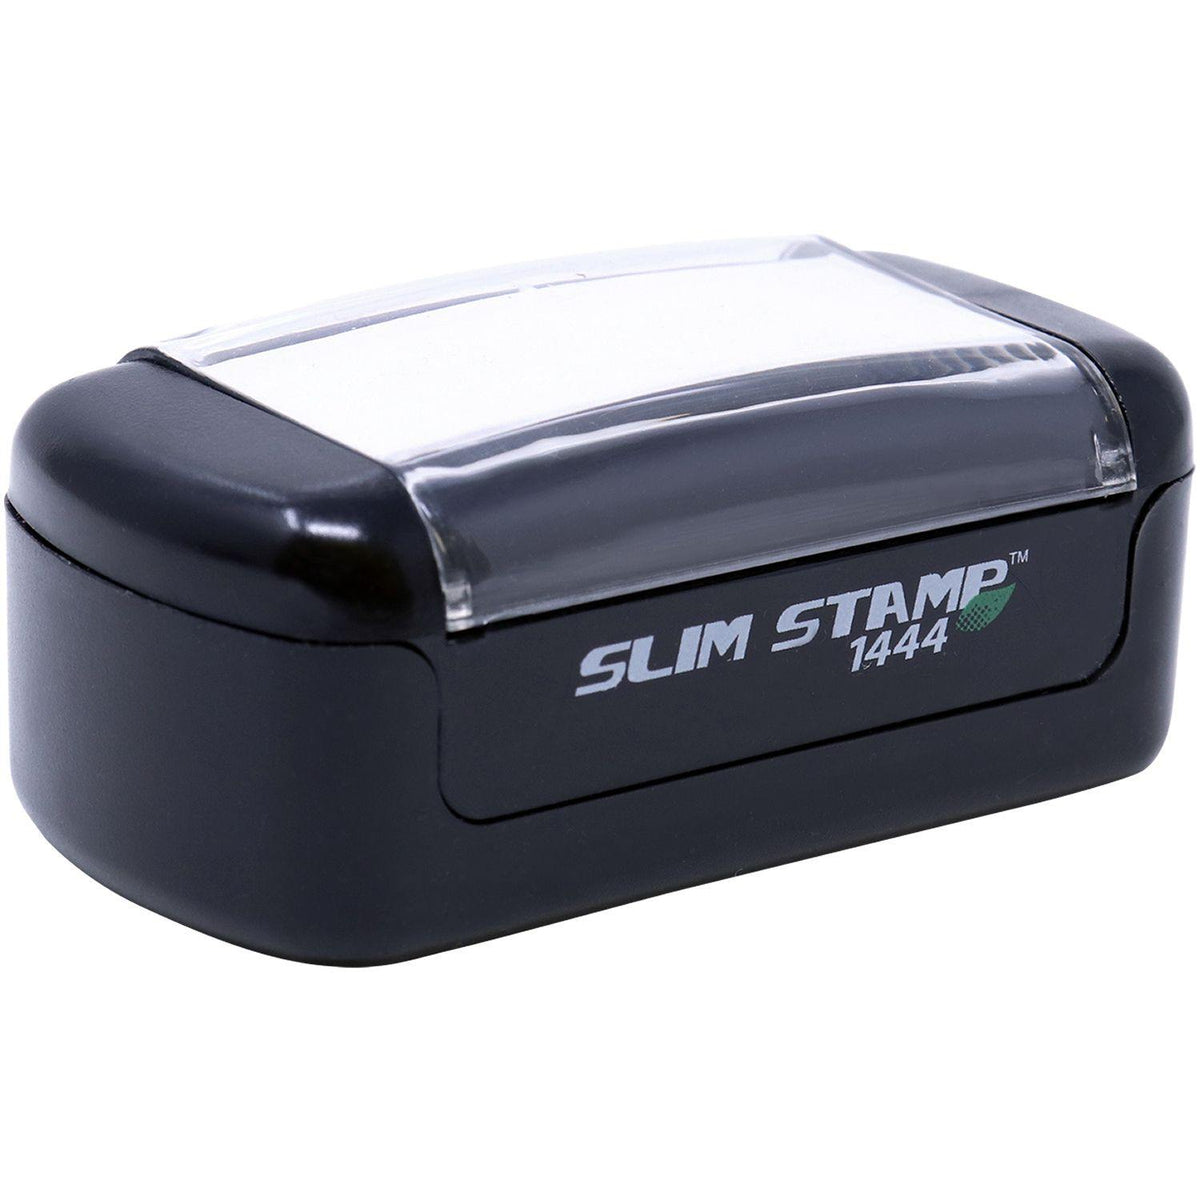 Alt View of Slim Pre-Inked Confirmation Stamp Mount Angle